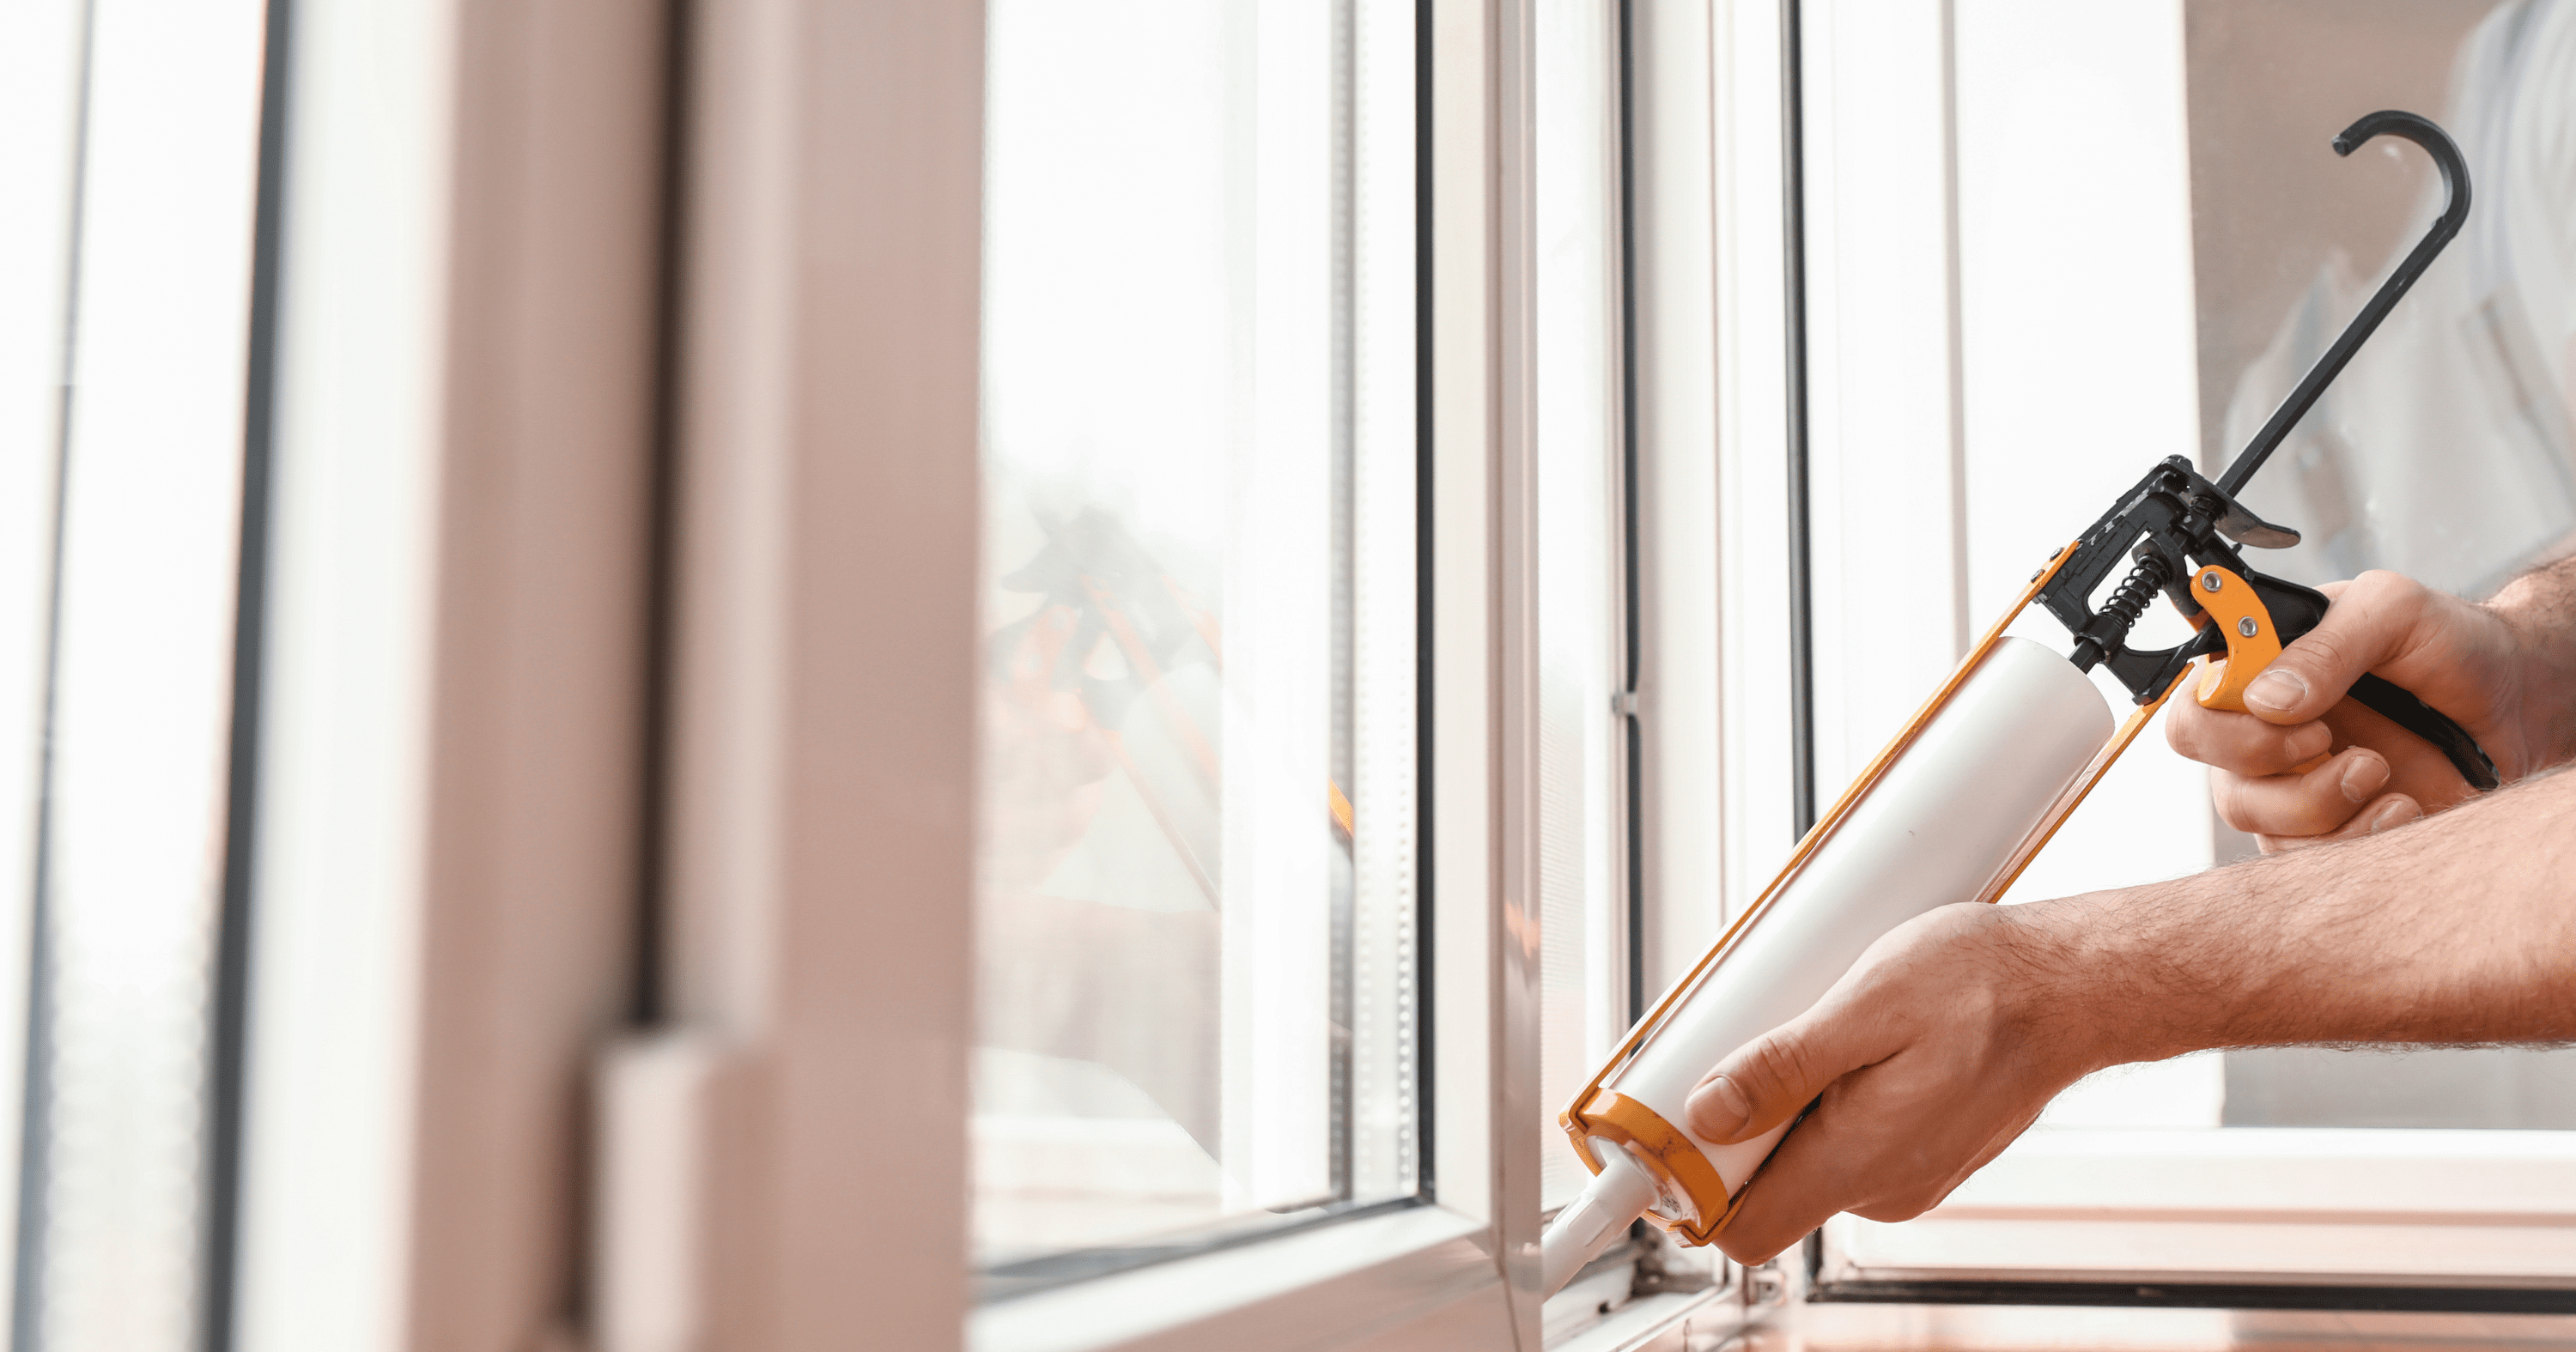 A stock image of a person sealing a window - start your property search on Share to Buy!